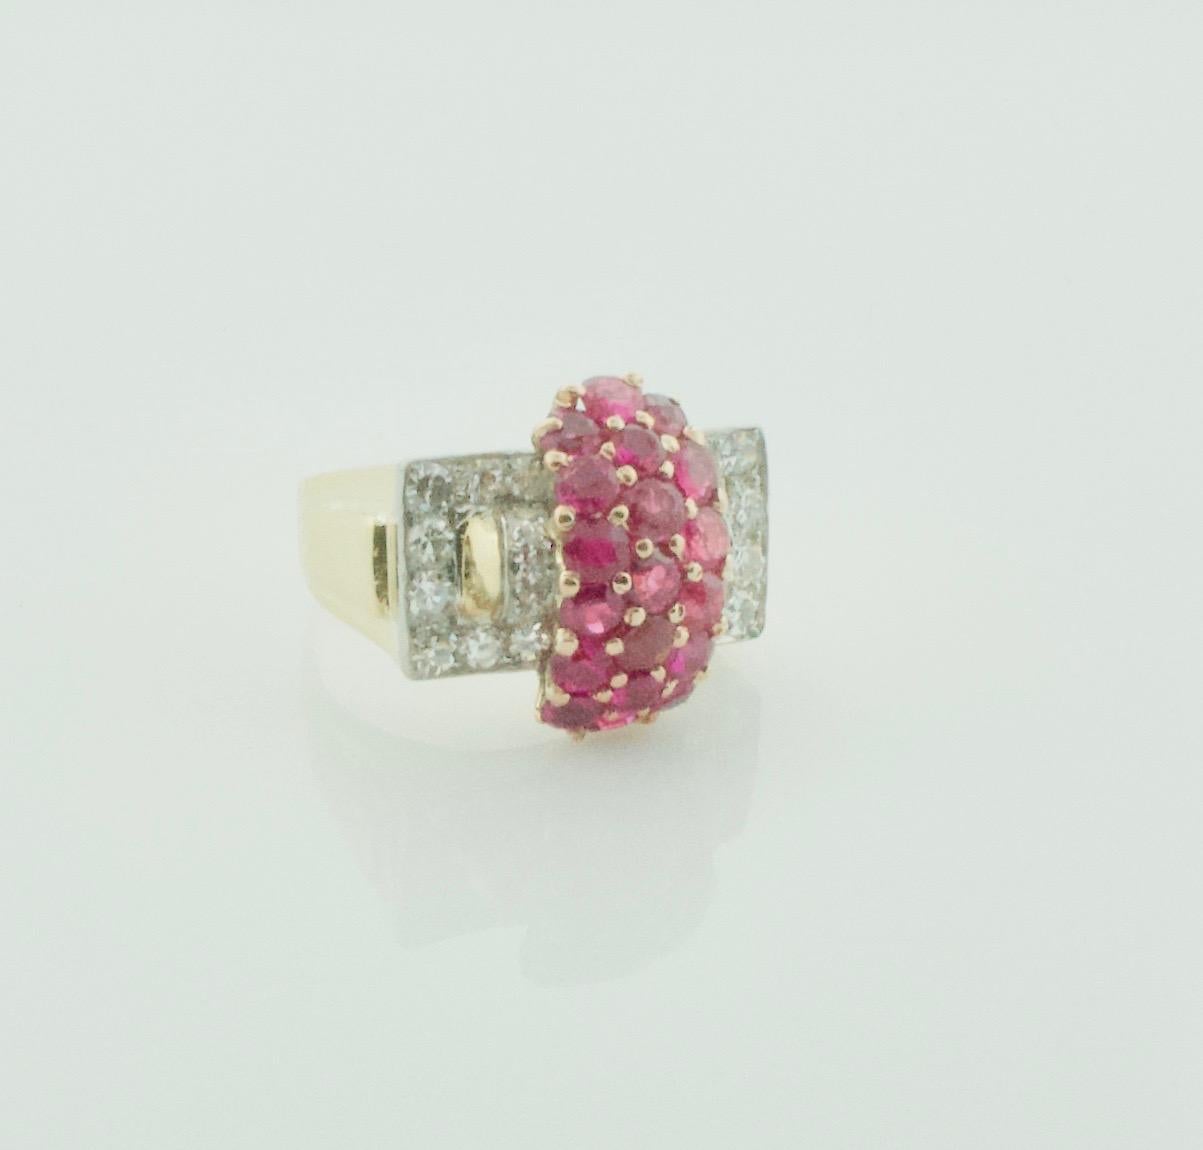 1940's Retro Ruby and Diamond Ring in Yellow Gold and Palladium
Nineteen Round Rubies weighing 2.30 carats approximately [bright with no imperfections visible to the naked eye]
Twenty Four Round Cut Diamonds weighing .80 carats approximately  GHI - 